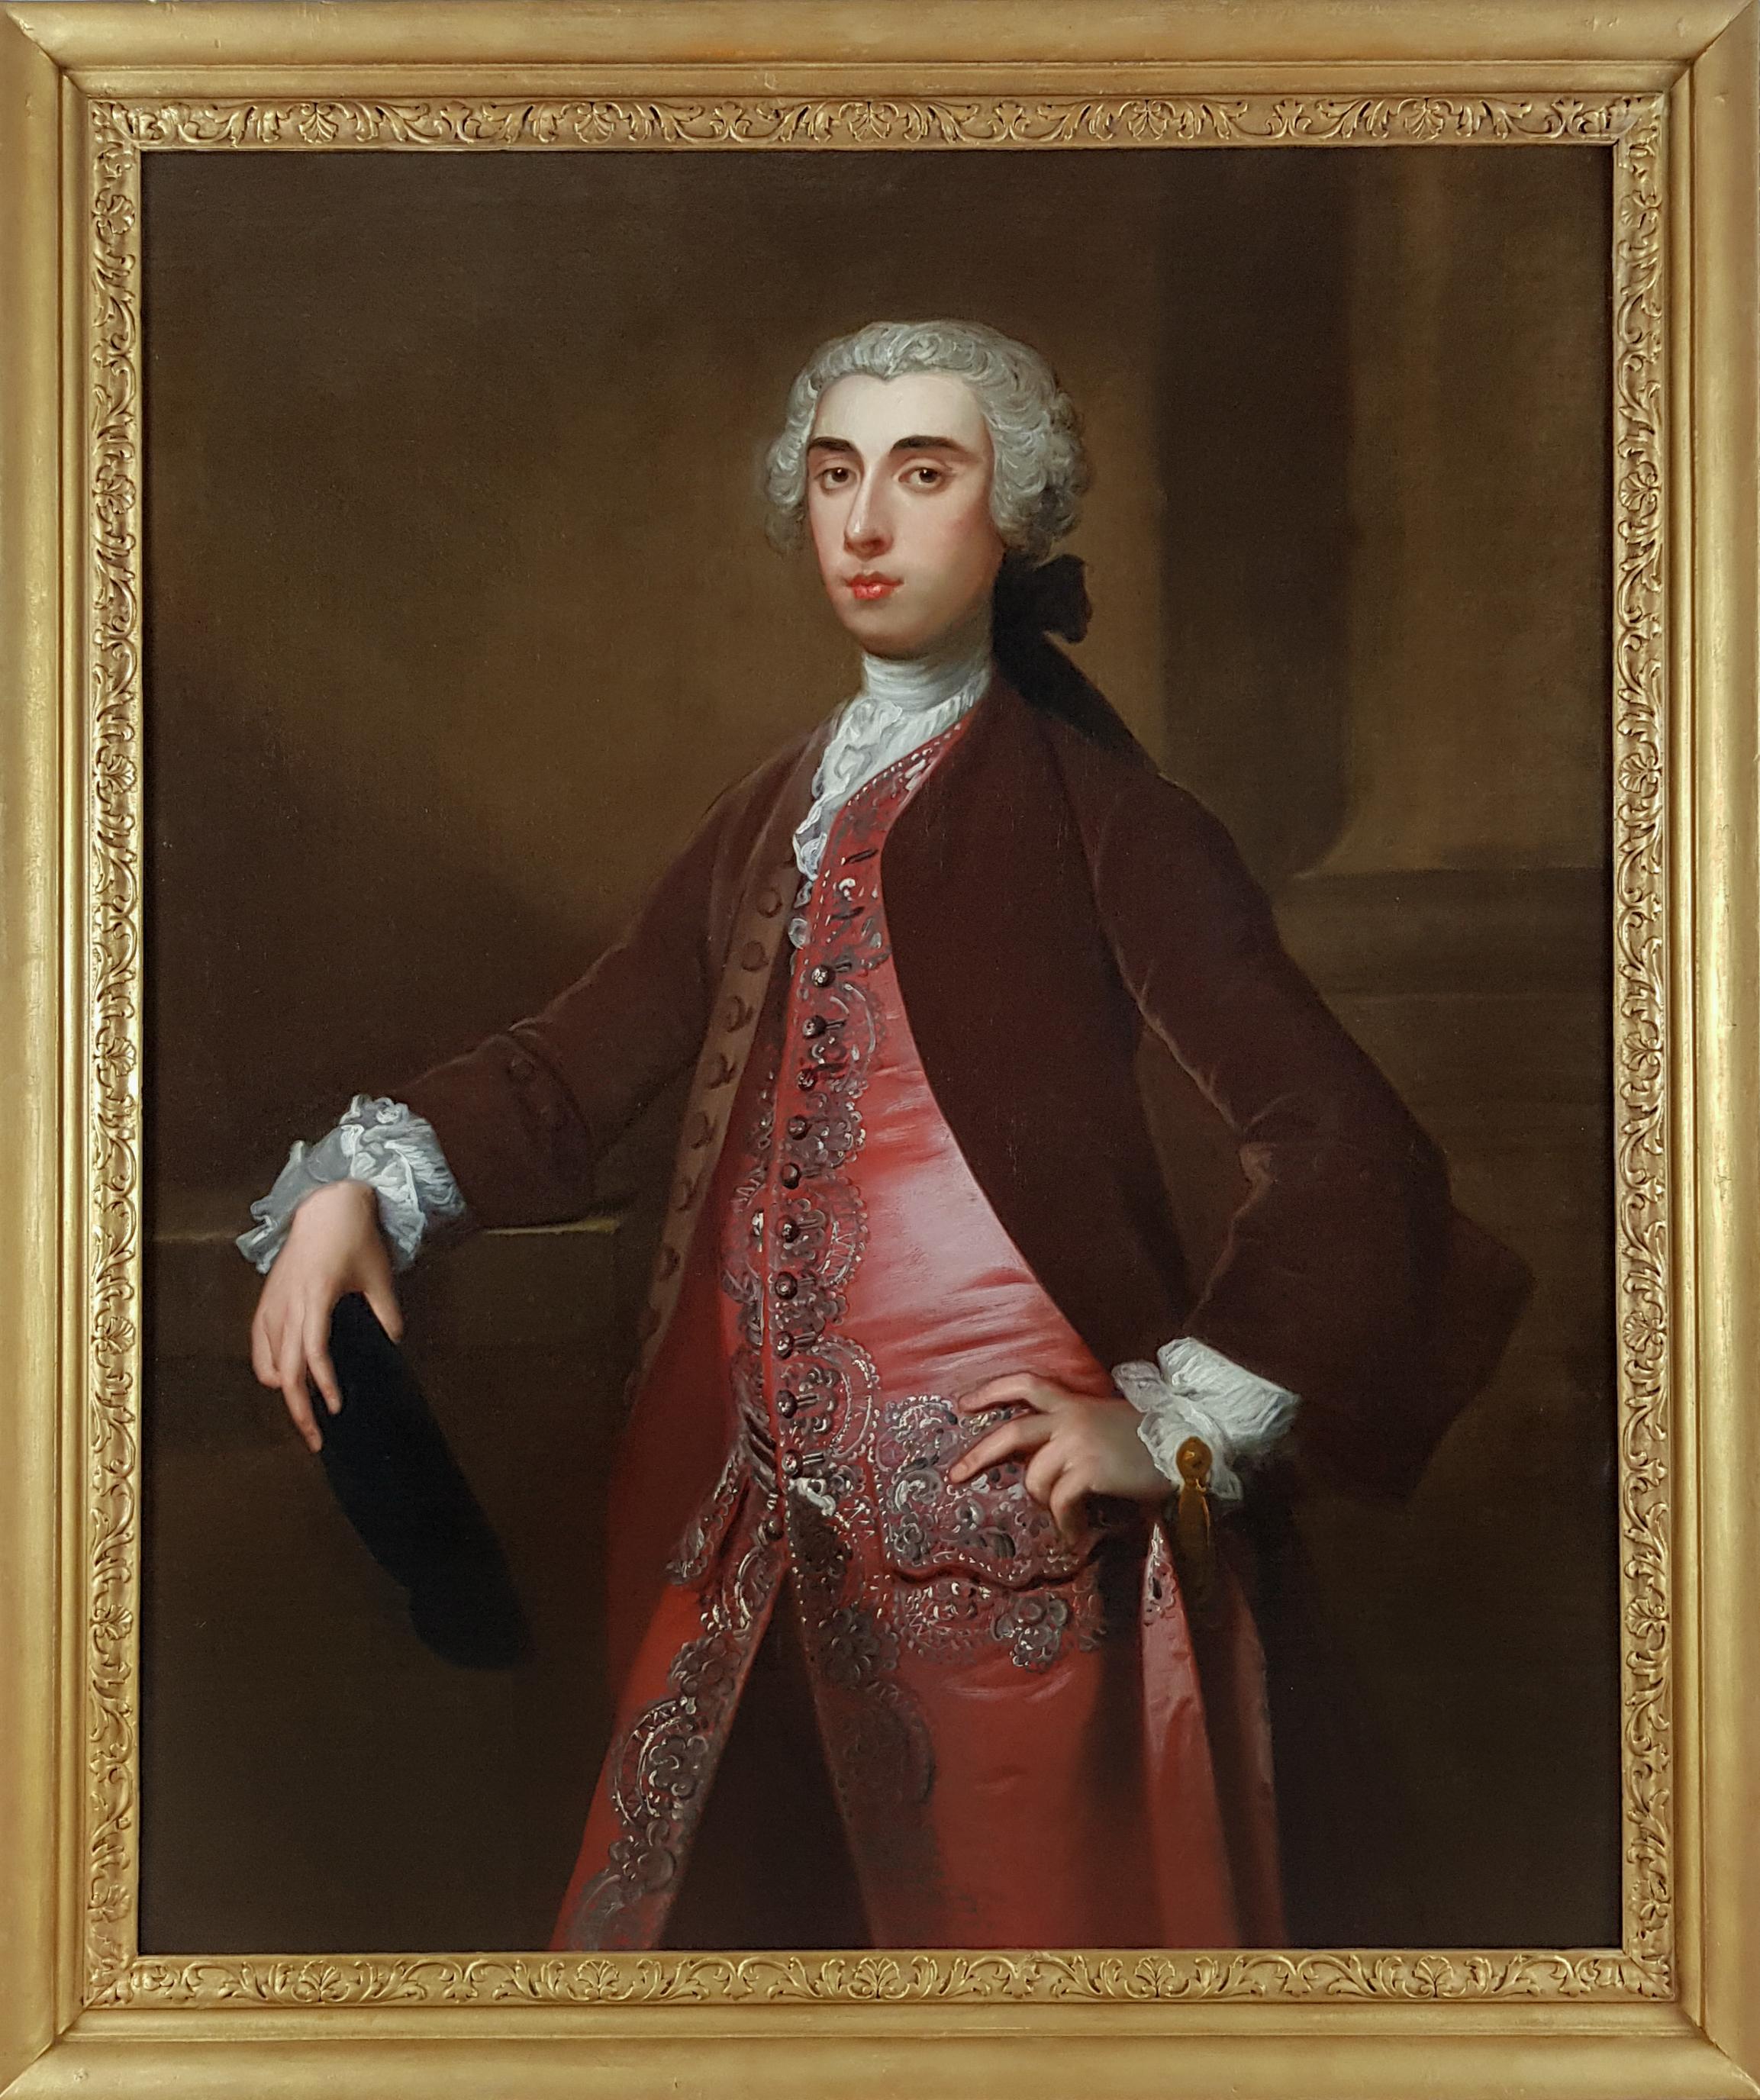 Circle of Allan Ramsay (1713-1784), and Joseph van Aken (c.1699–1749)

This striking portrait is an exquisite example of the English 18th century Grand Manner portrait. The sitter is portrayed in a standard gentlemanly pose for the period but it is